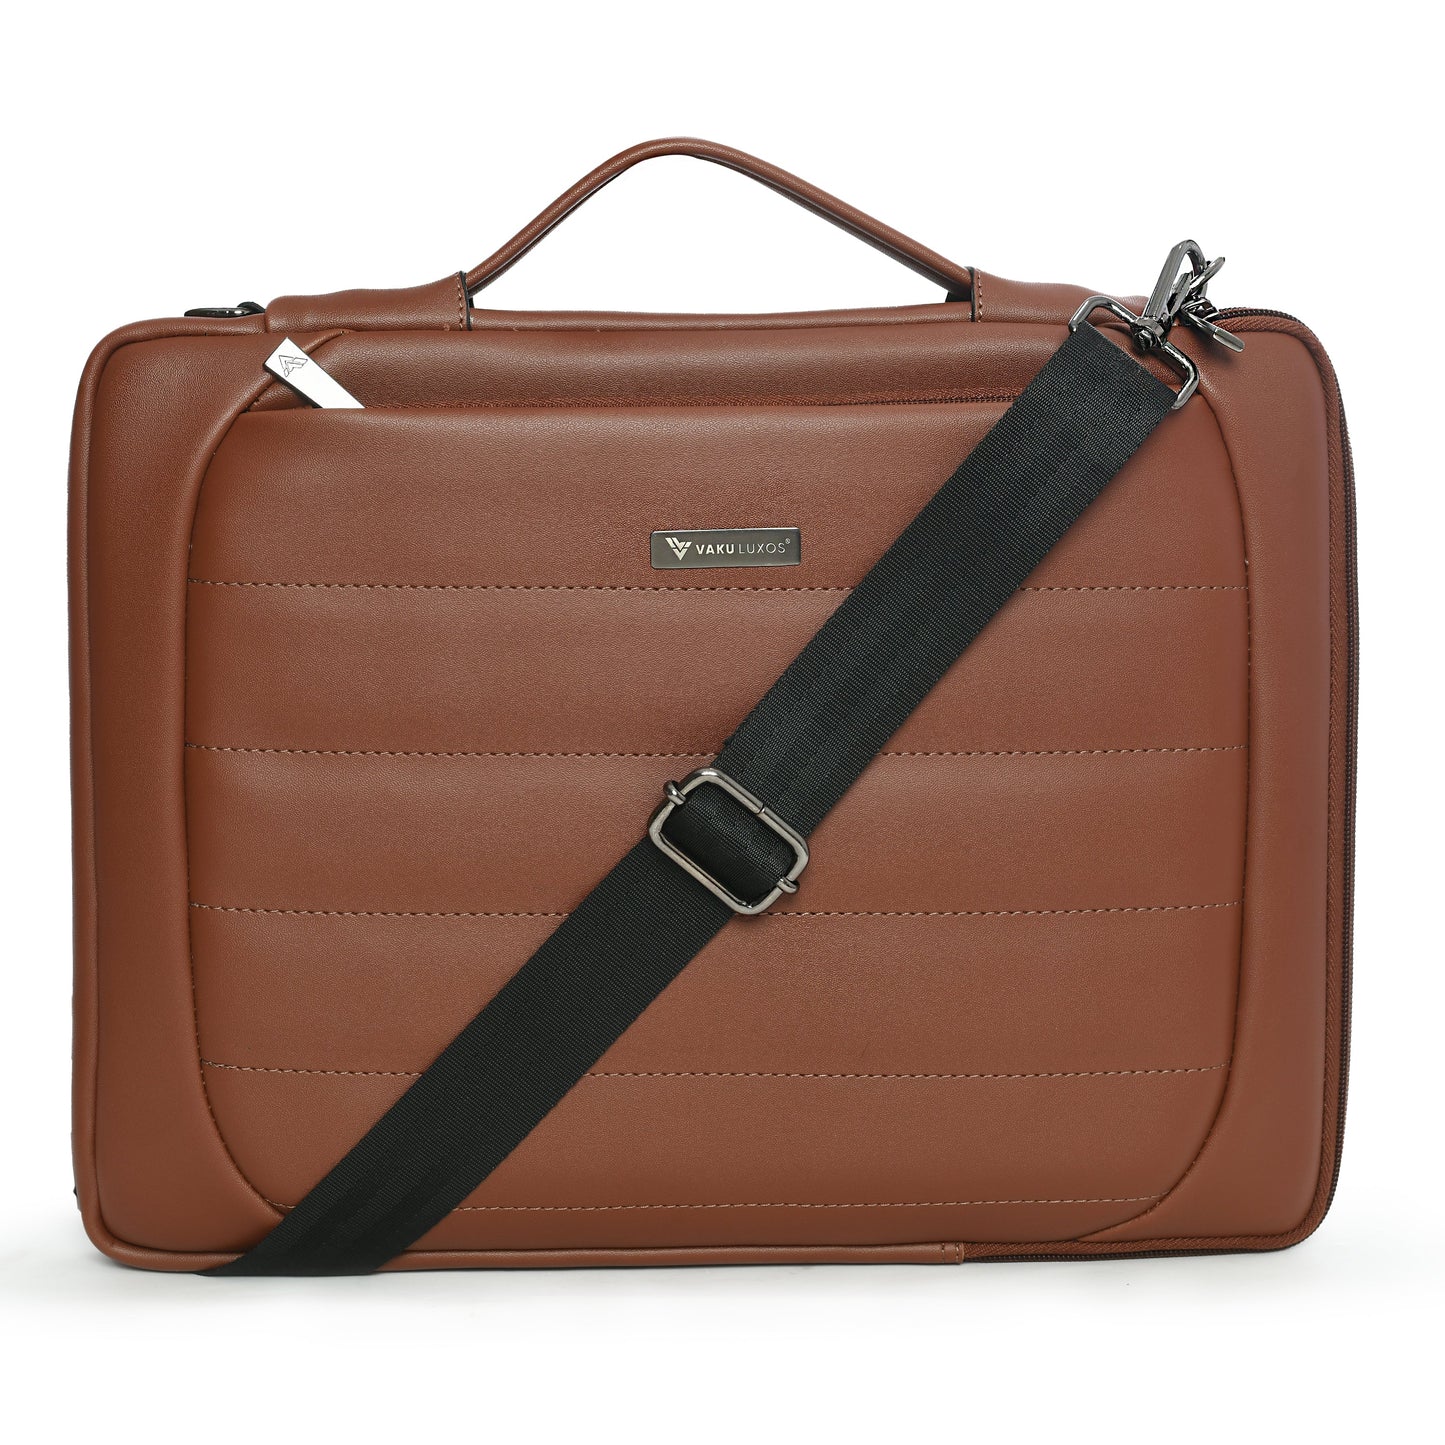 vaku-luxos®-lasa-chivelle-premium-collection-sleeve-for-macbook-13-14-with-strap-highly-durable-tan-brown8905129019402